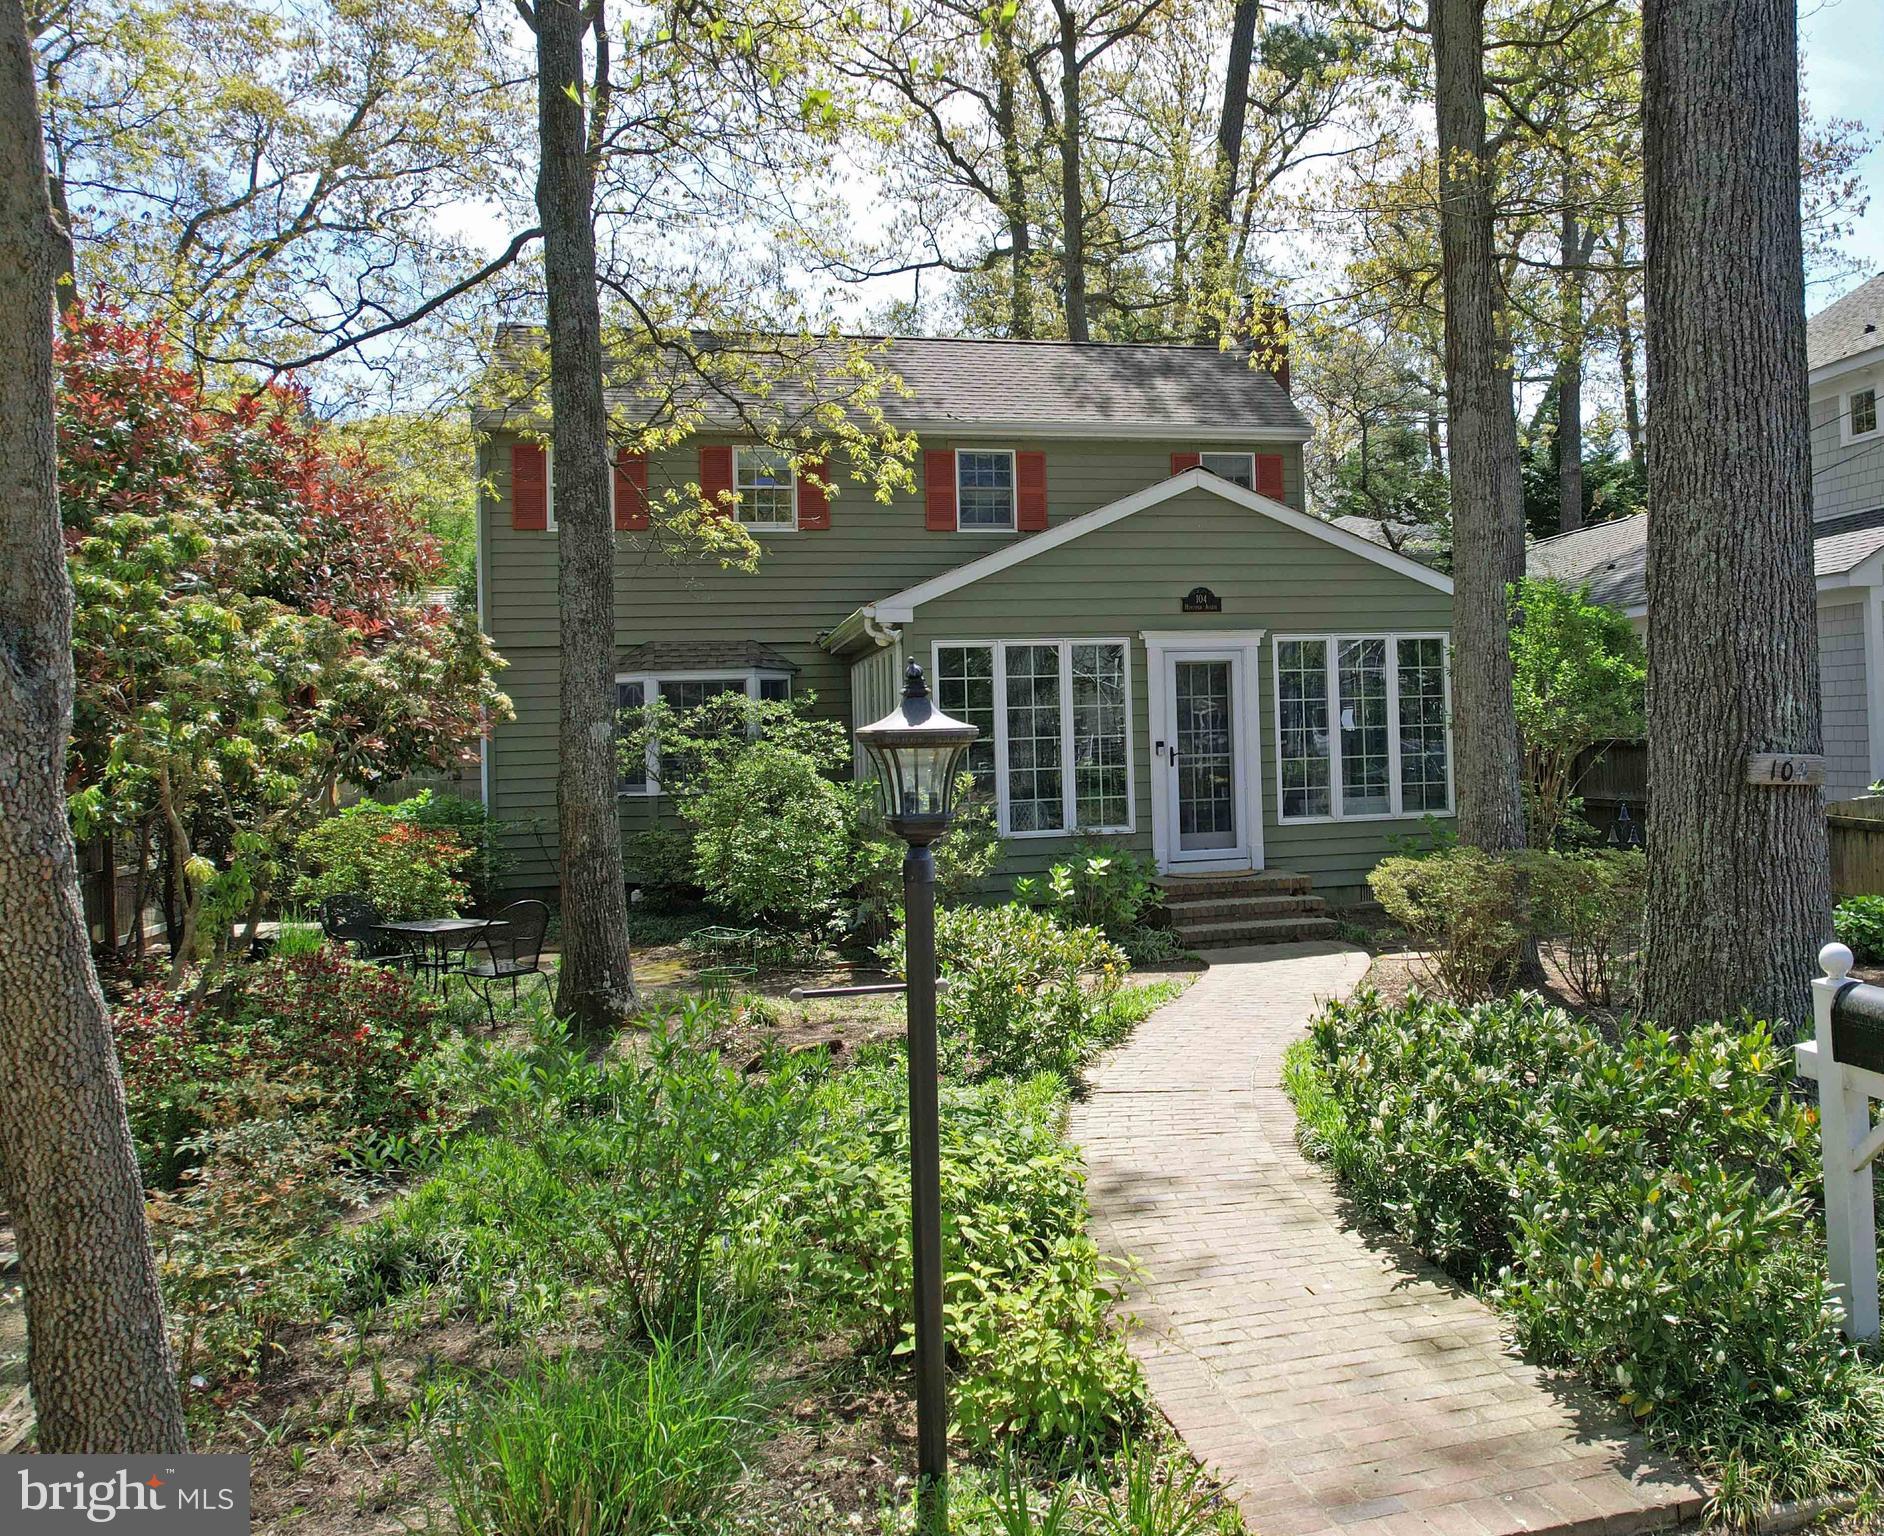 a front view of a house with a yard and fountain in middle